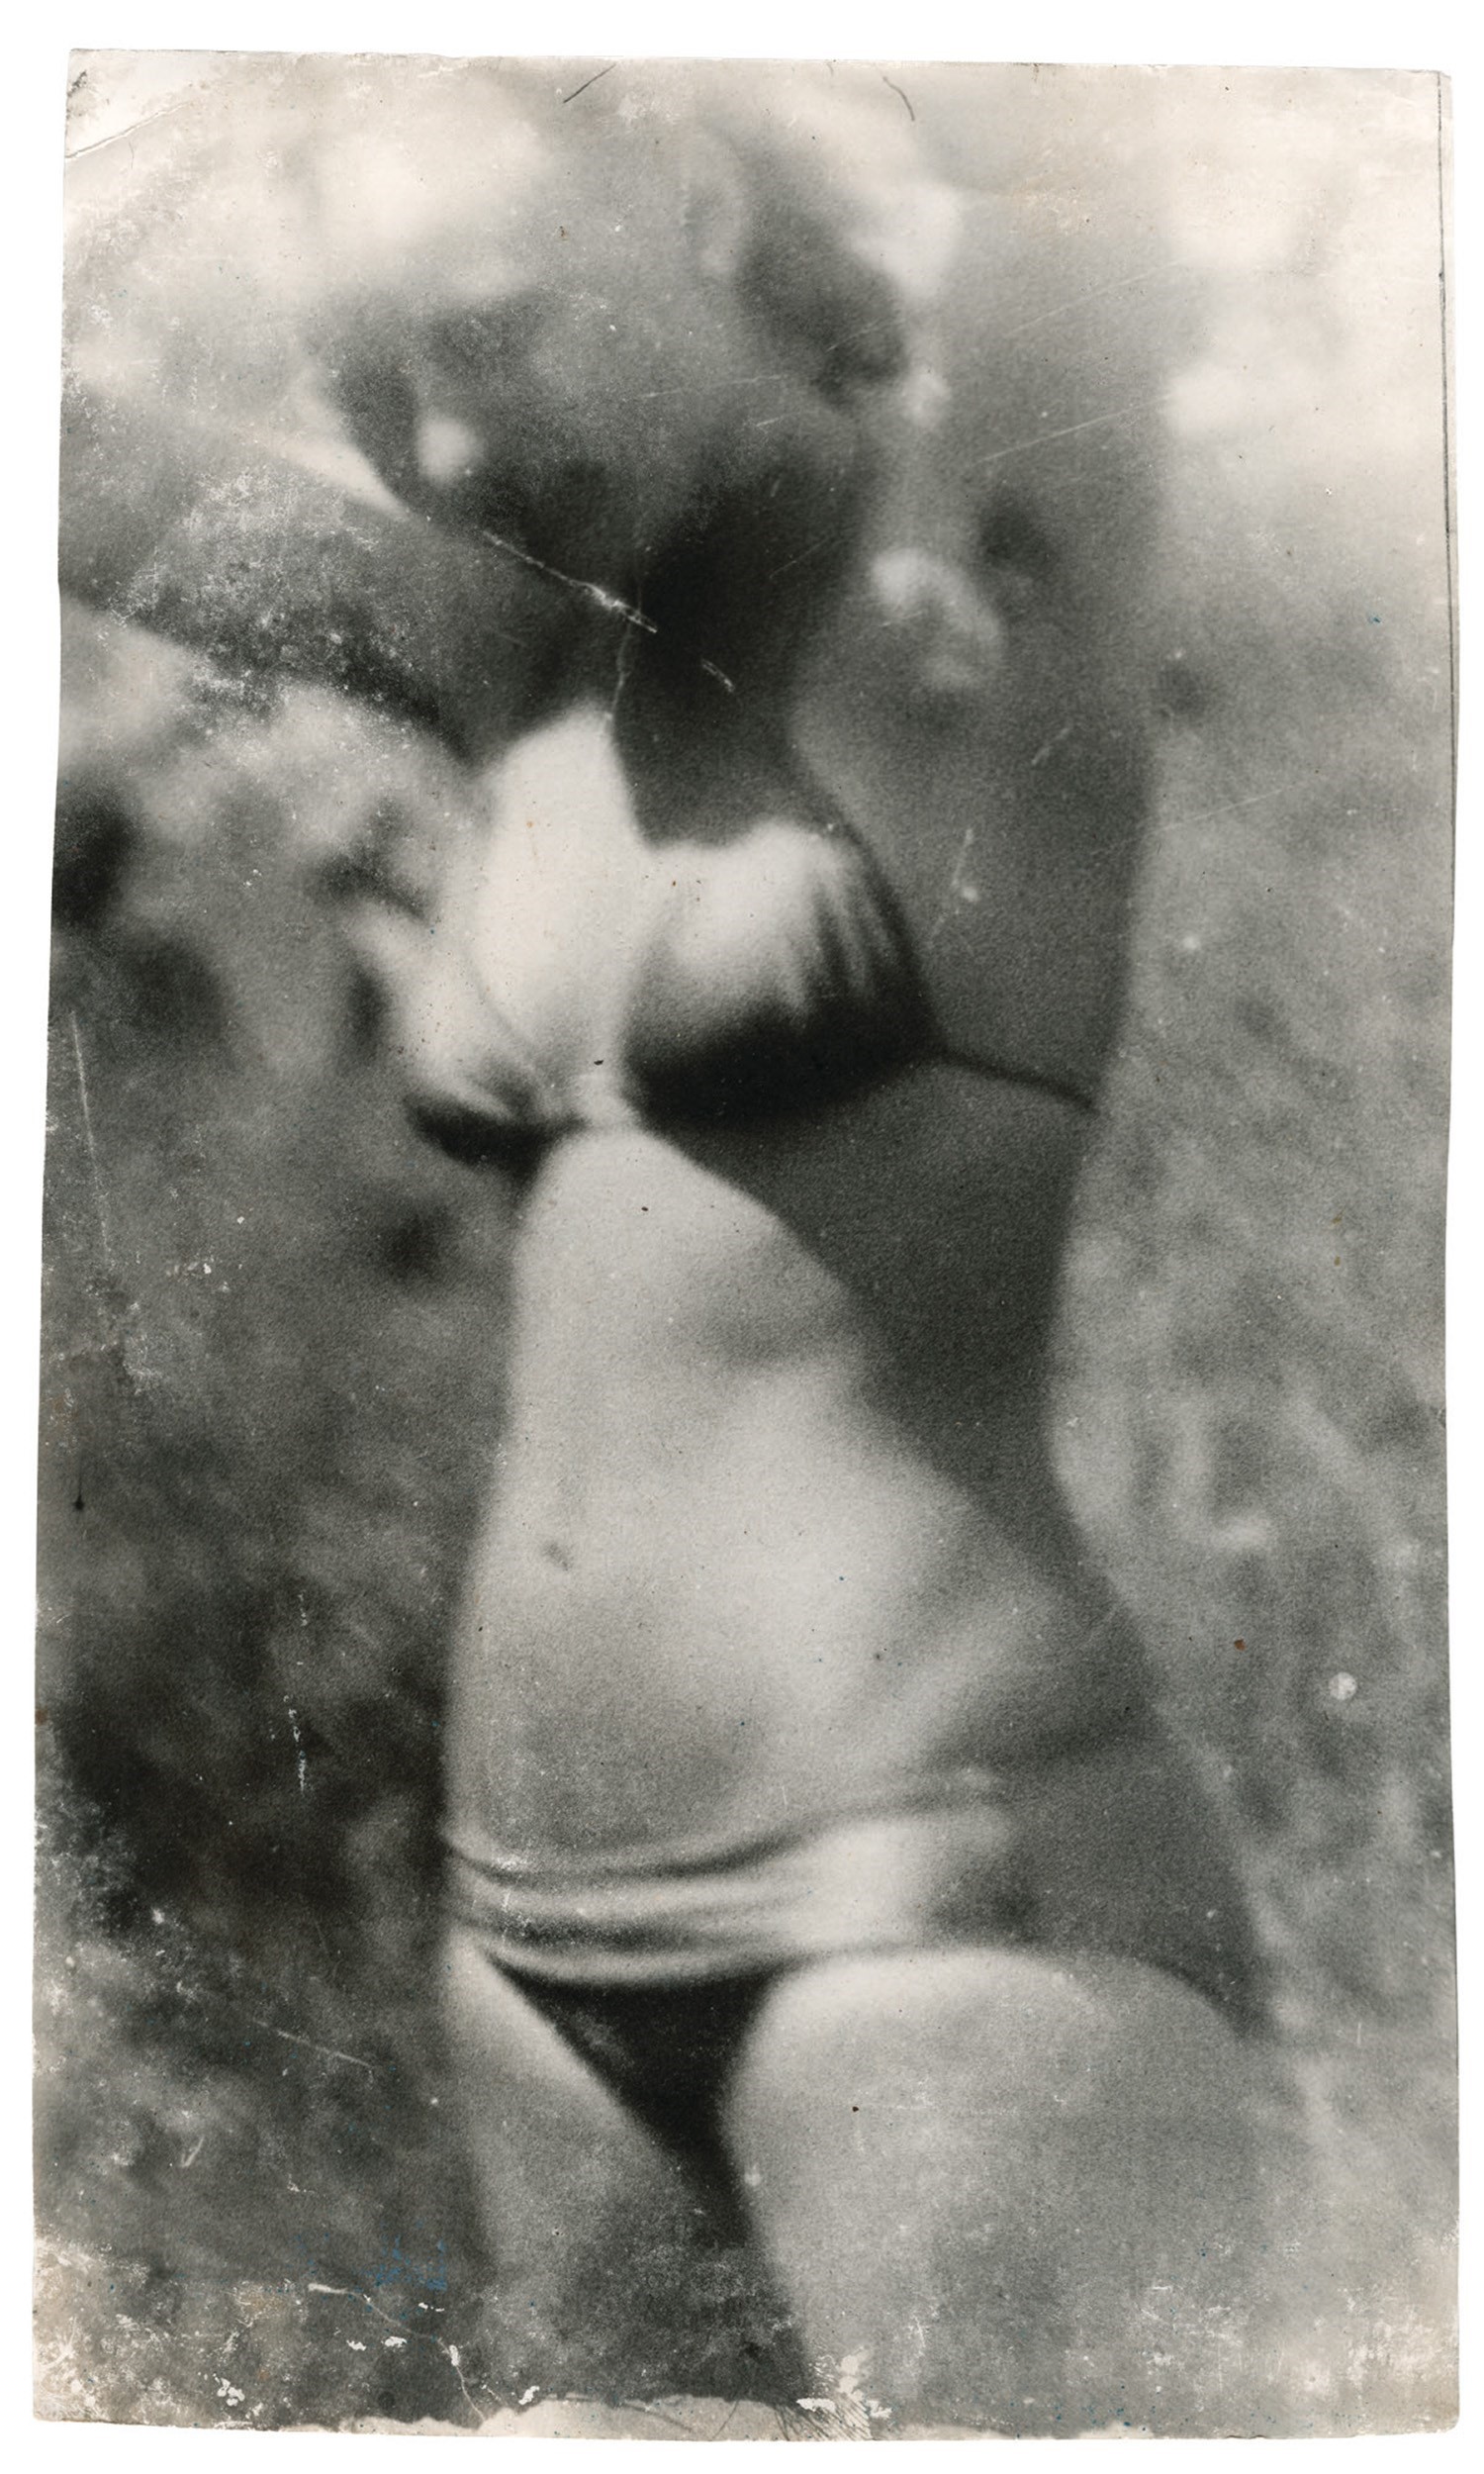 Miroslav Tichýs Mysterious Images of Unsuspecting Women AnotherMan picture